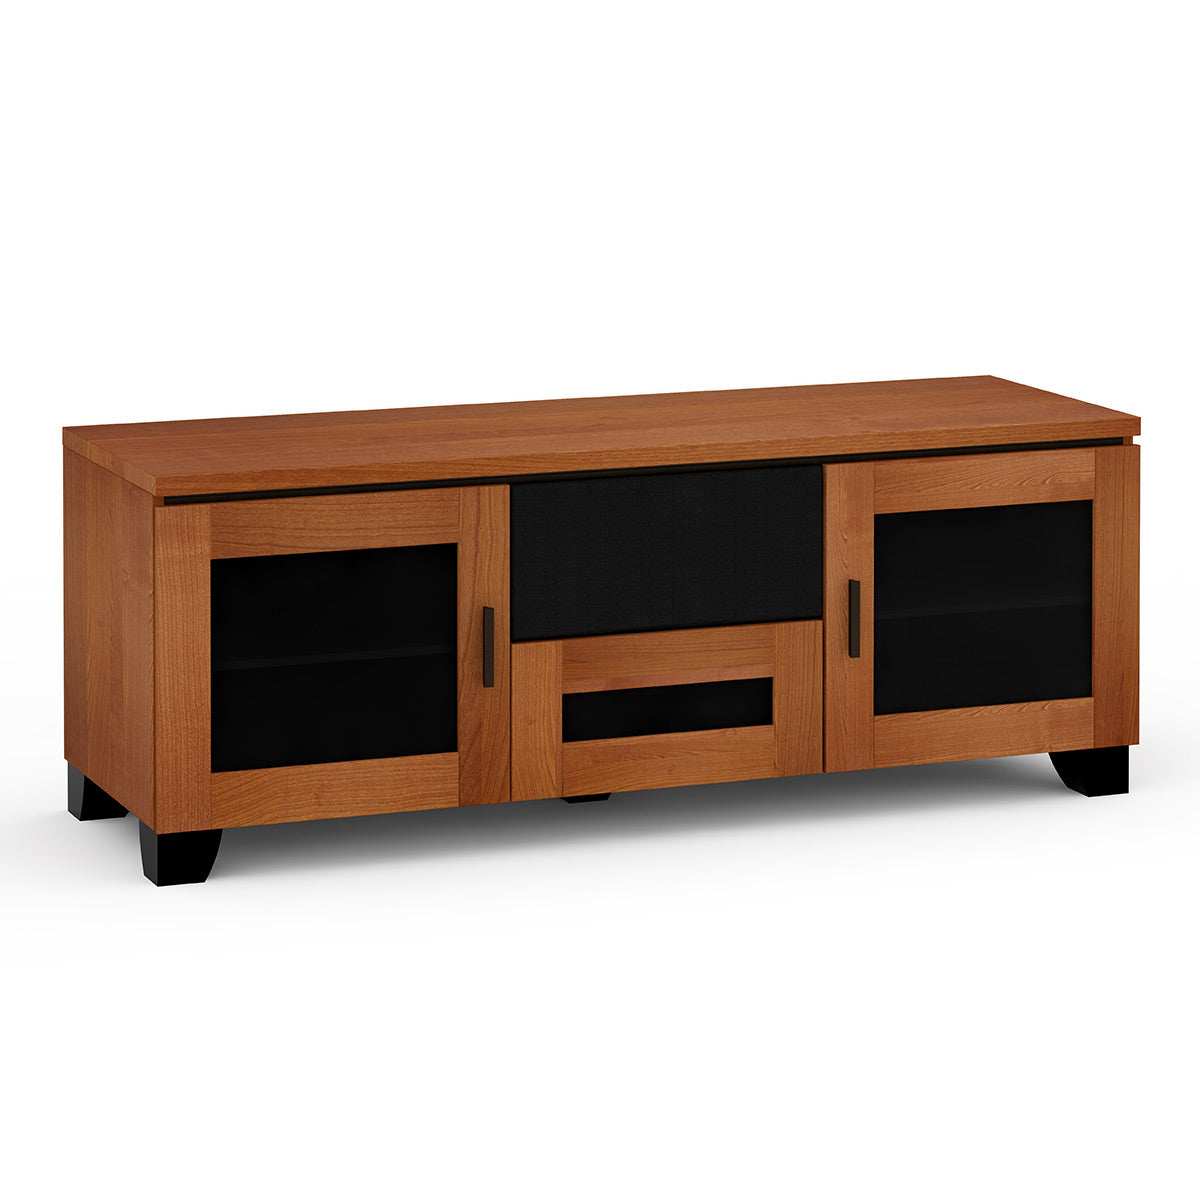 Salamander Chameleon Collection Elba 236 Triple Speaker Integrated Cabinet (Wide Framed American Cherry Doors with Smoked Glass Inserts)